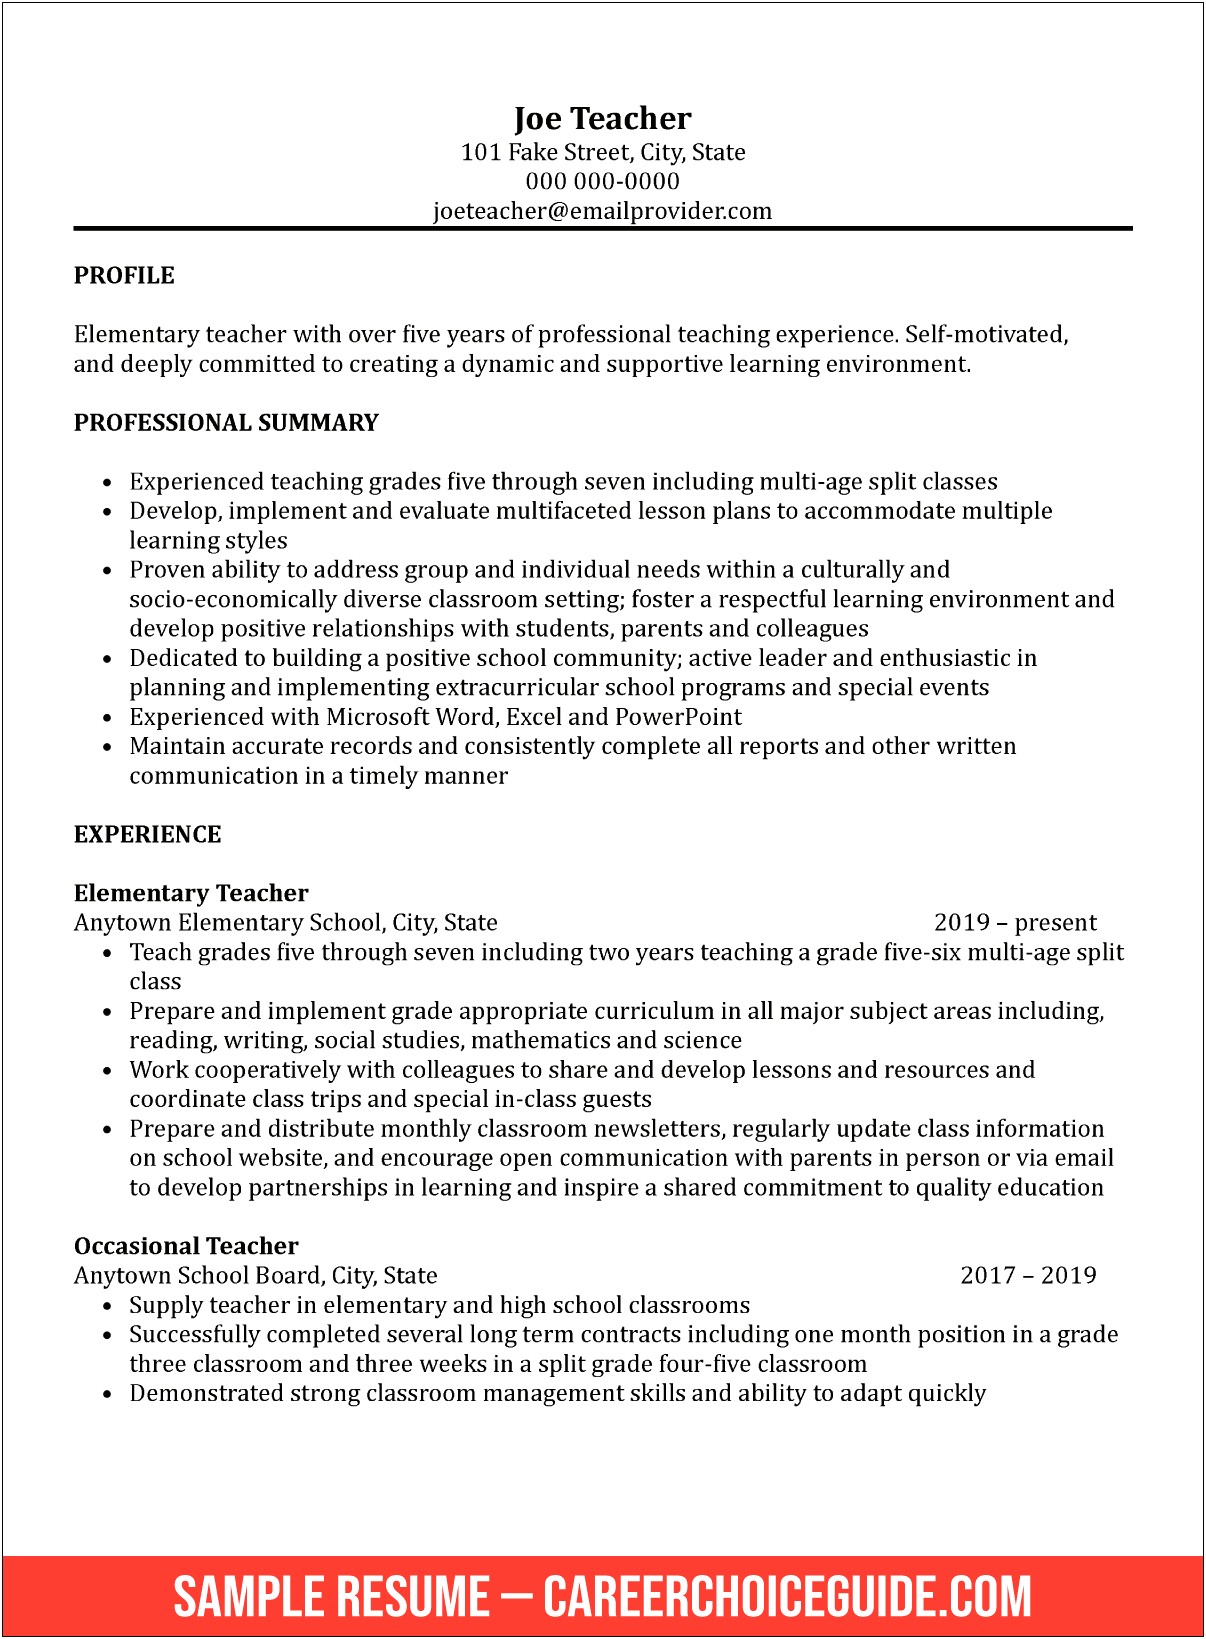 Example Of Resume For Teaching Position